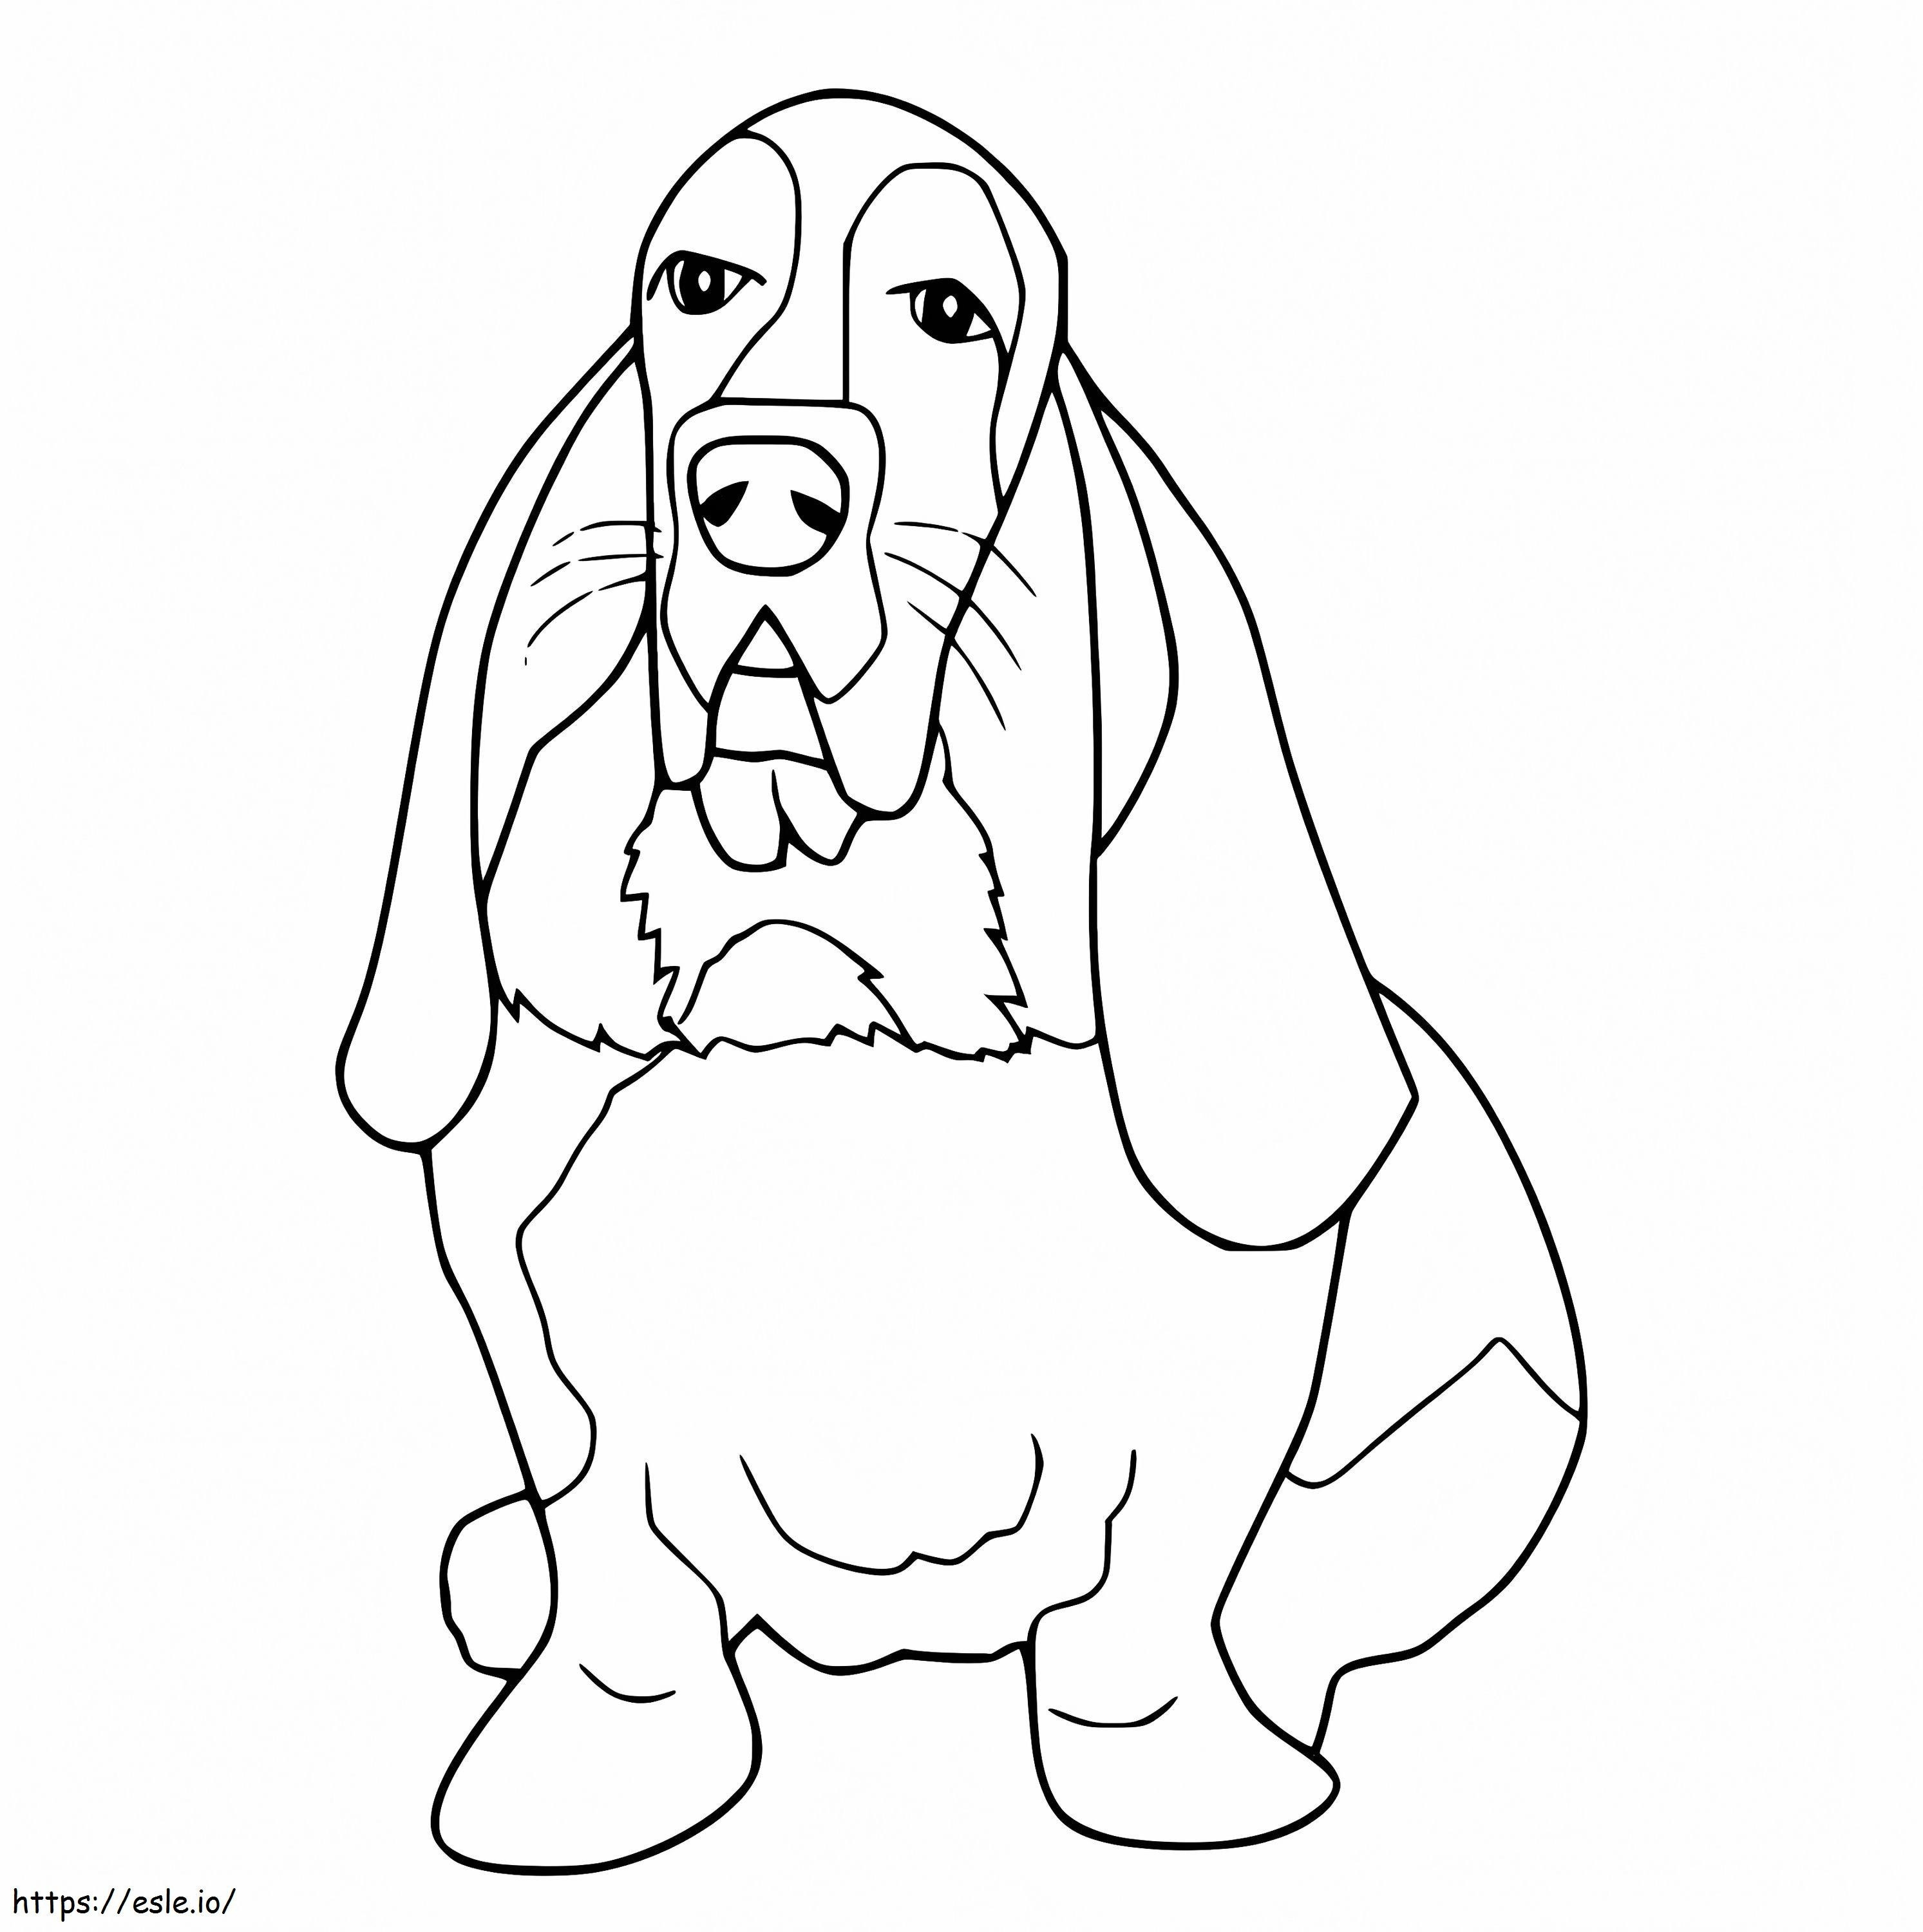 Printable Basset Hound coloring page